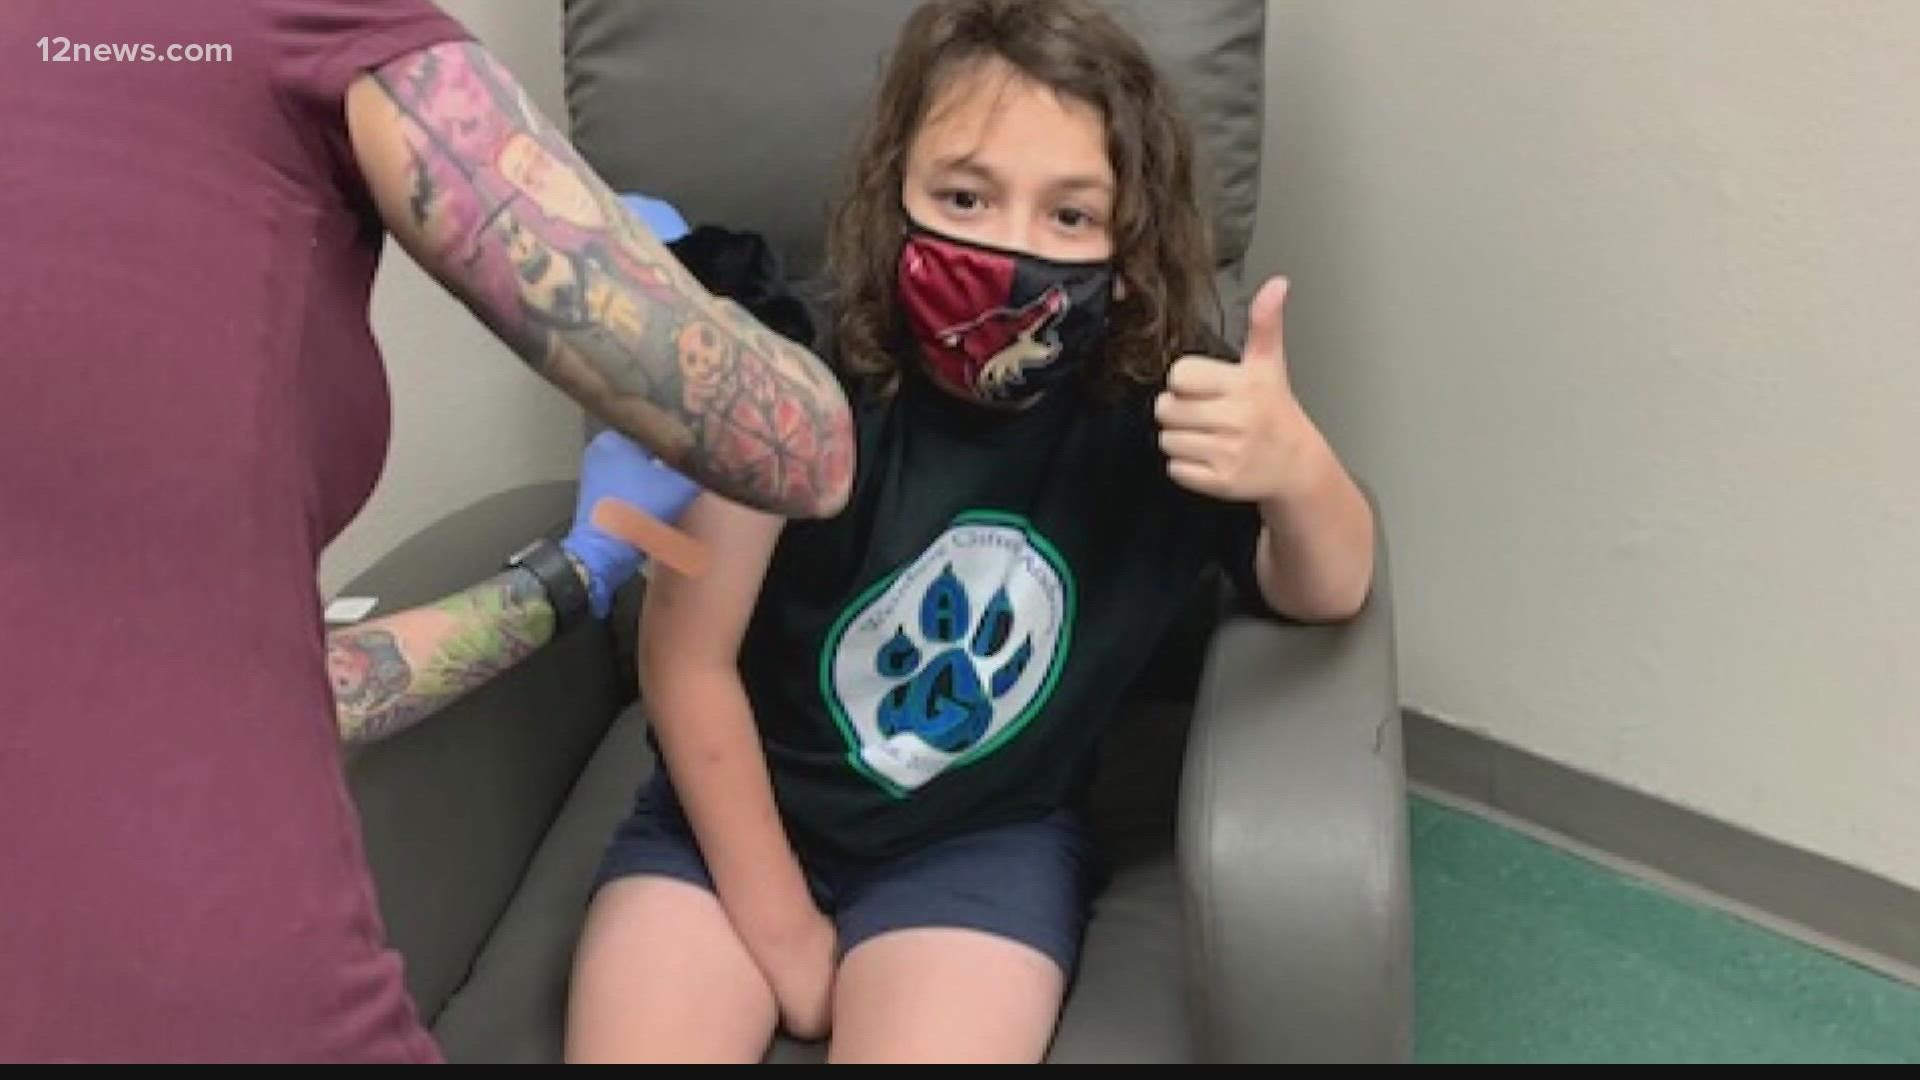 COVID-19 cases are surging in children. A new push to get kids 12 and under vaccinated is underway. Moderna's vaccine trial for kids has been ongoing in Phoenix.